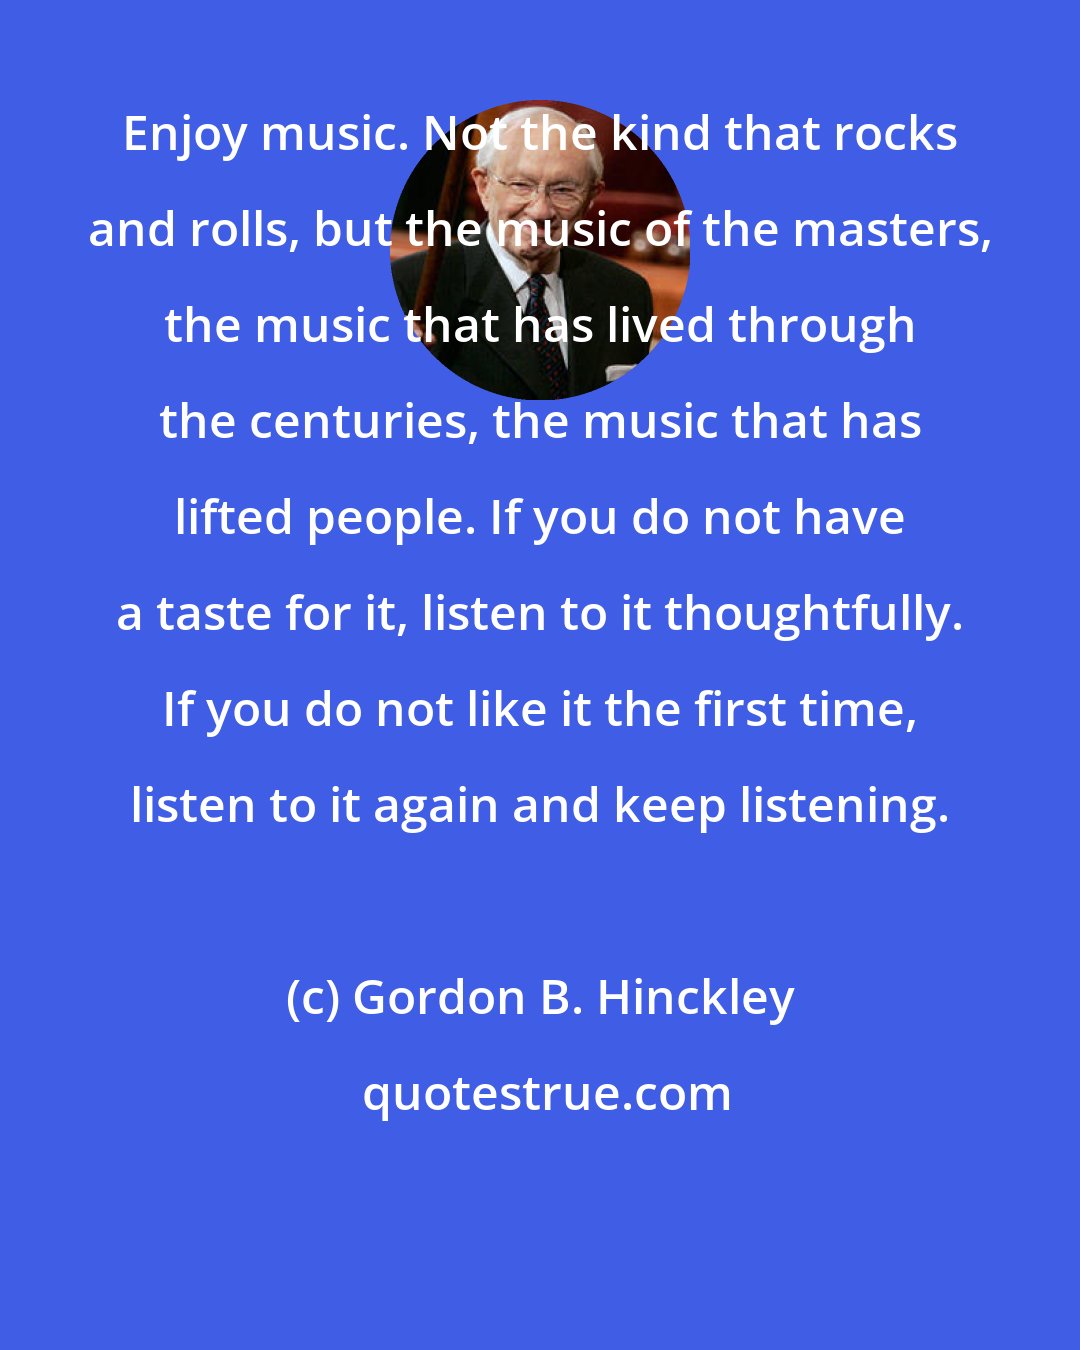 Gordon B. Hinckley: Enjoy music. Not the kind that rocks and rolls, but the music of the masters, the music that has lived through the centuries, the music that has lifted people. If you do not have a taste for it, listen to it thoughtfully. If you do not like it the first time, listen to it again and keep listening.